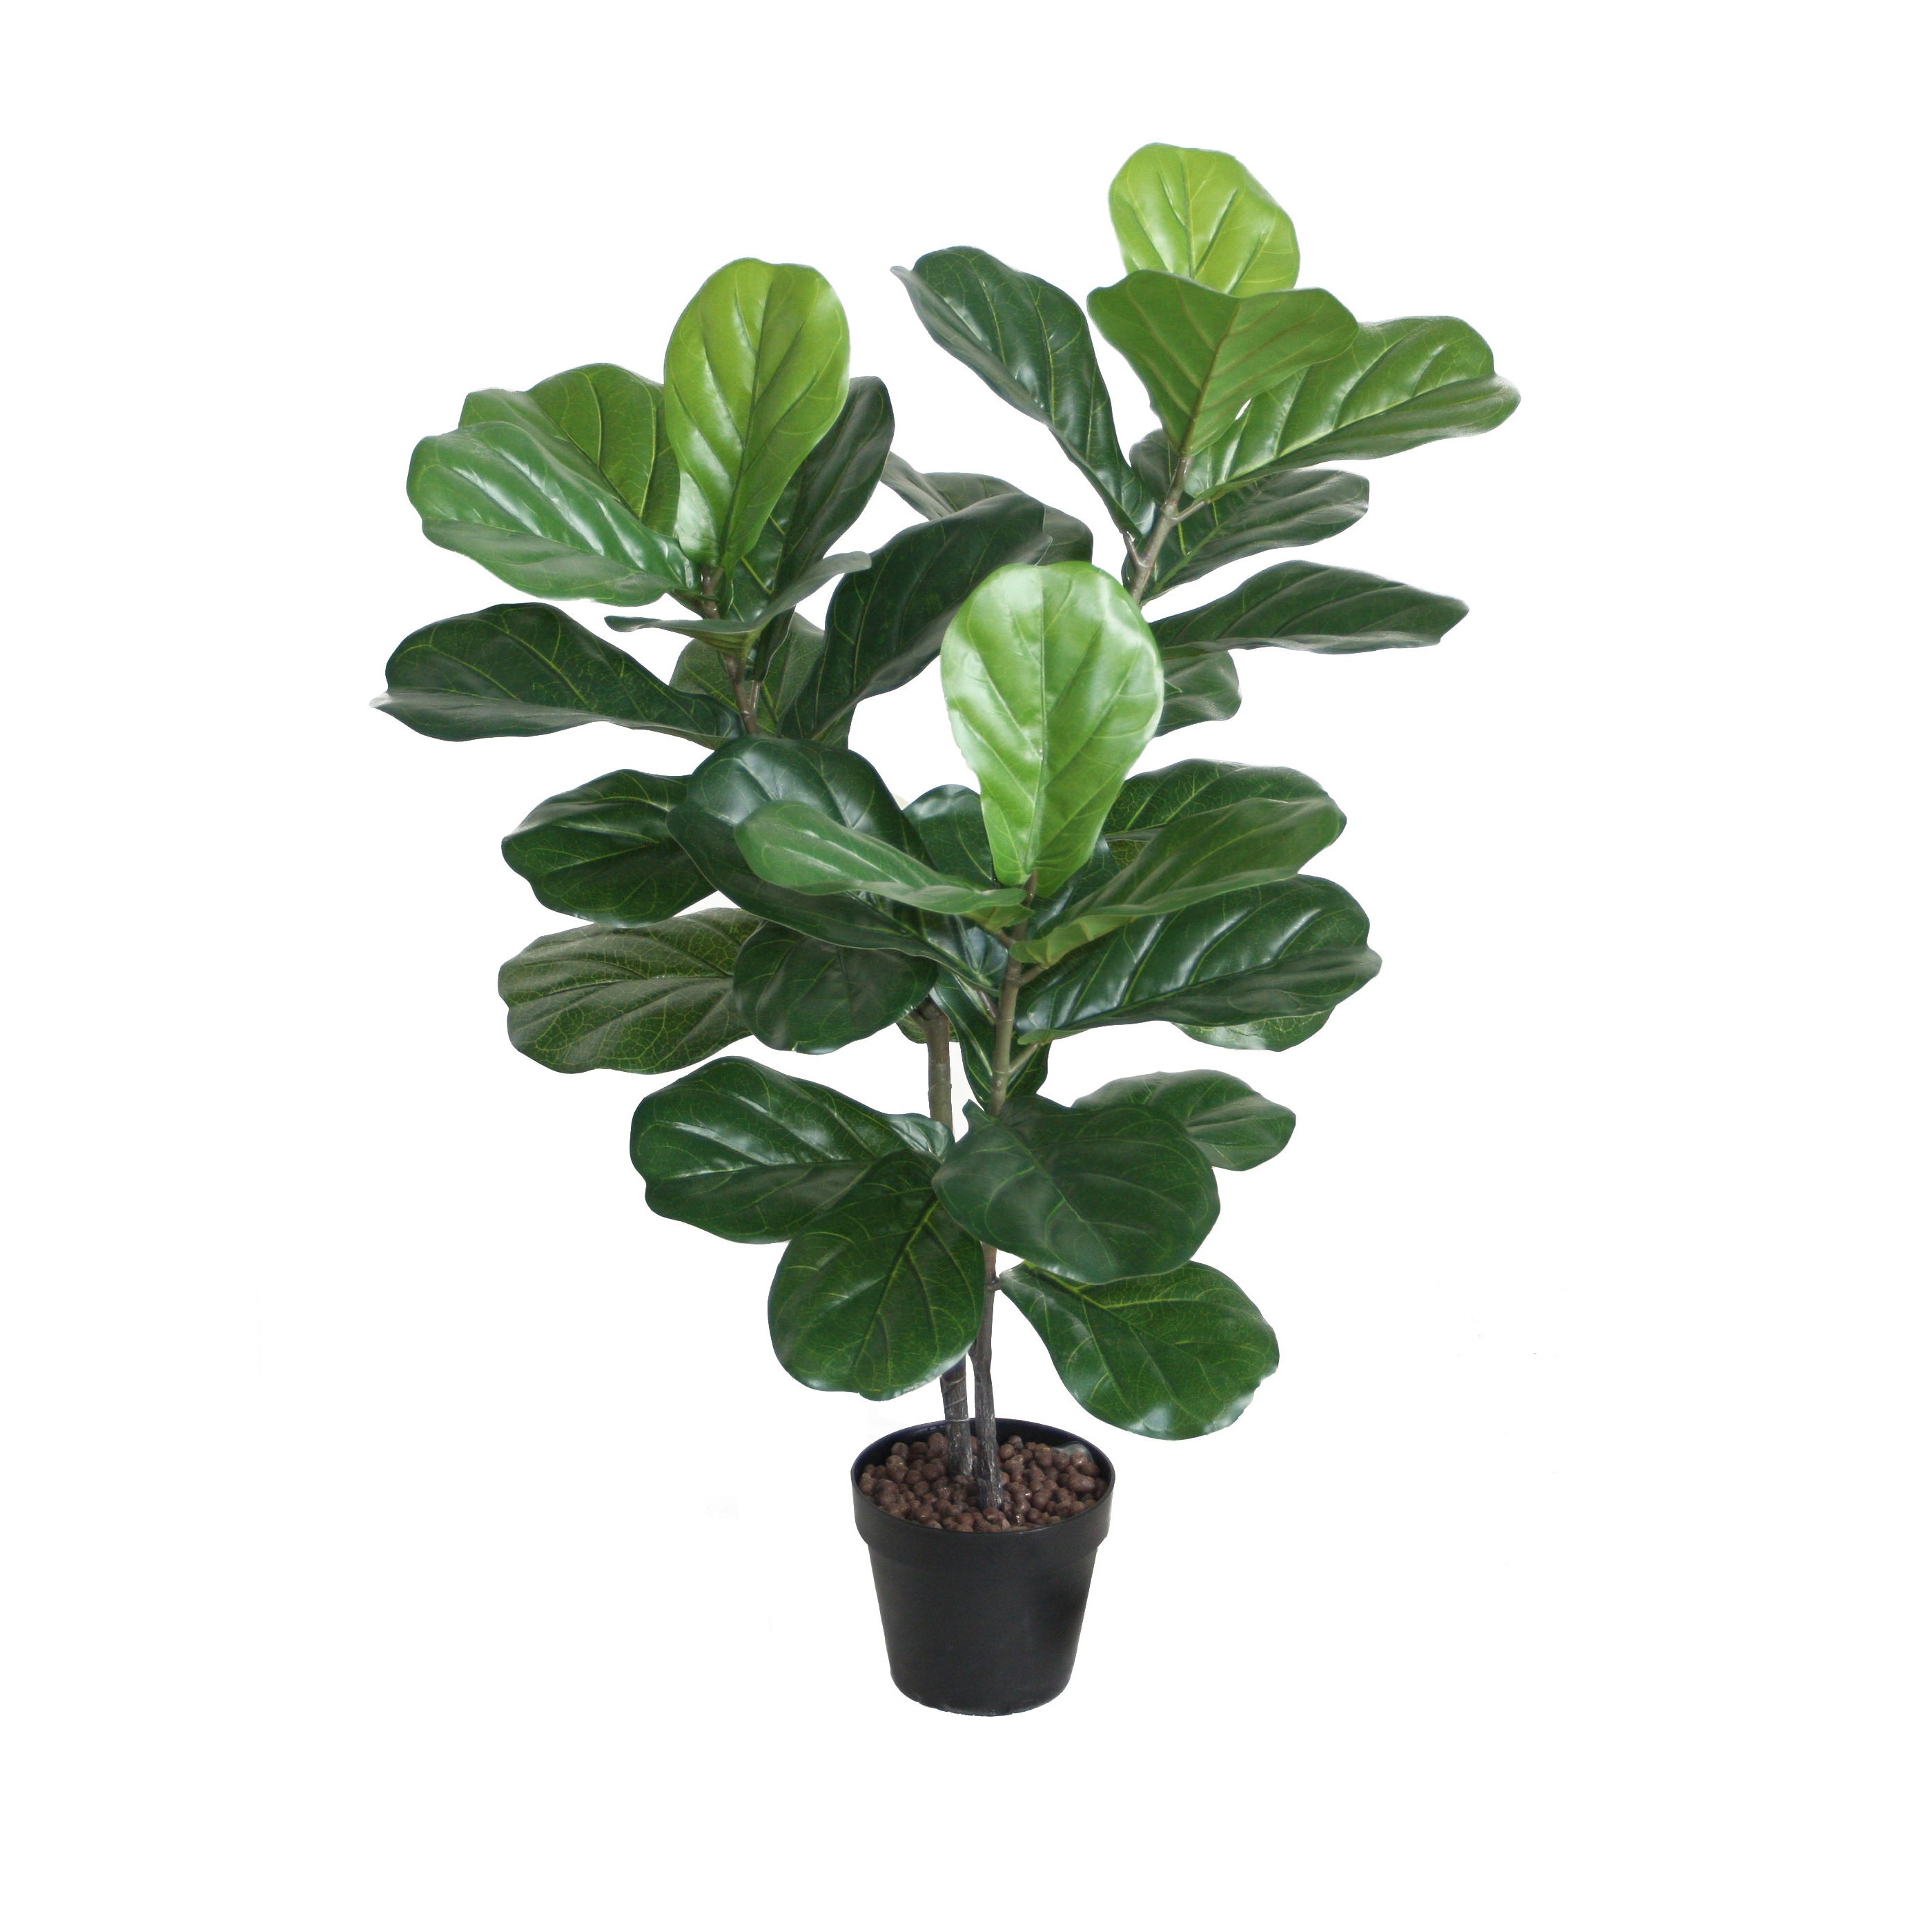 Artificial Fiddle leaf Fig tree 1m with 34 large leaves.